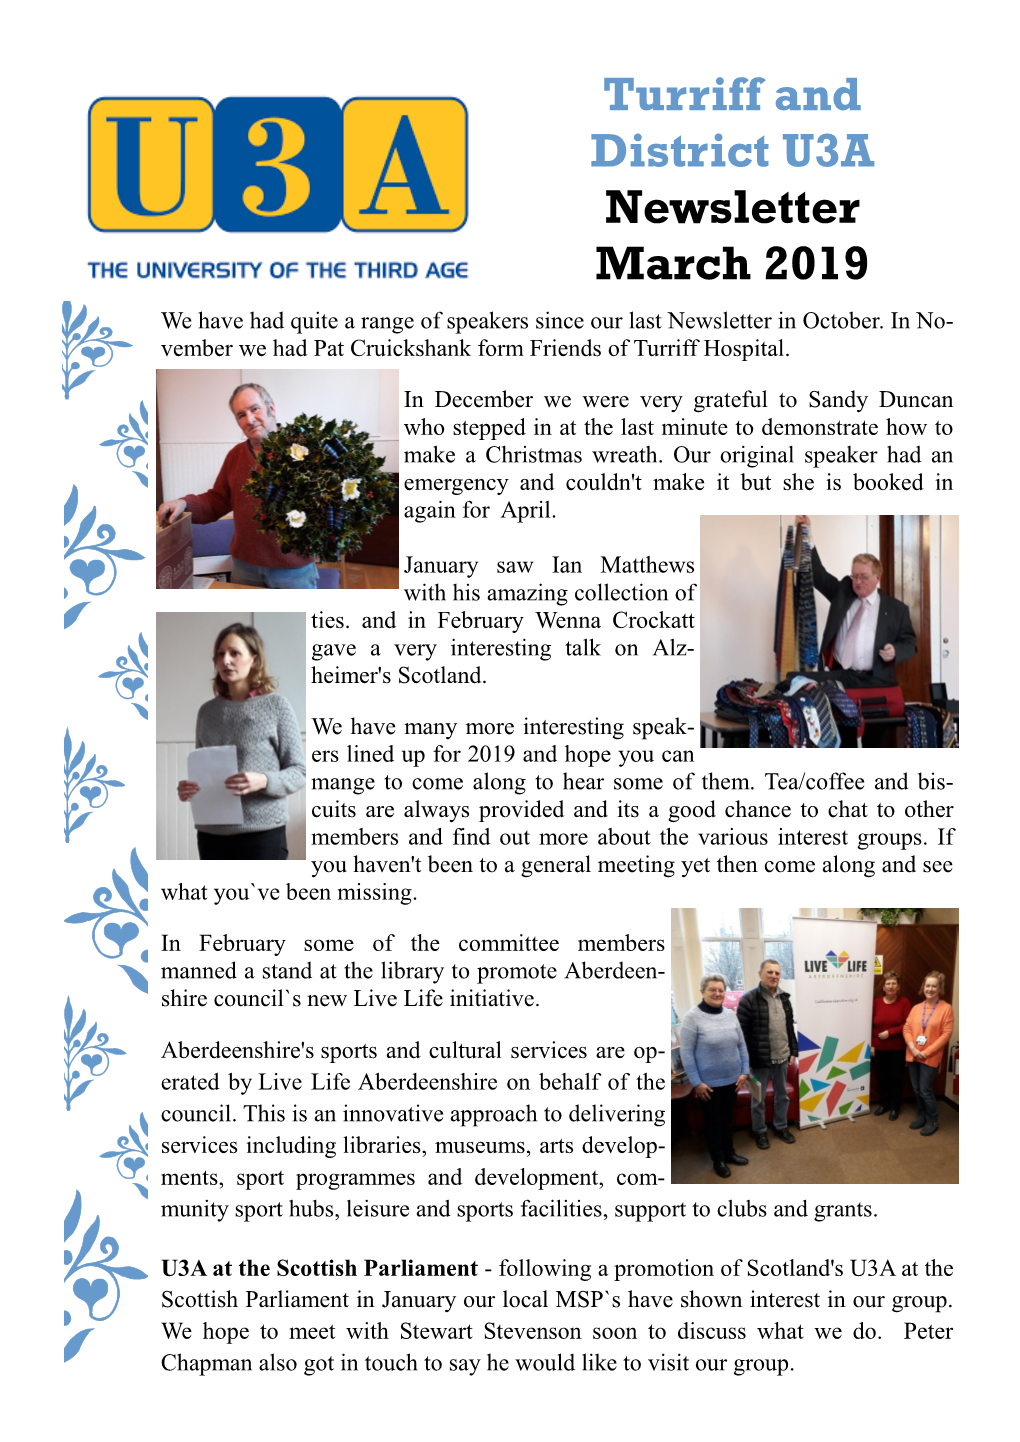 Turriff and District U3A Newsletter March 2019 We Have Had Quite a Range of Speakers Since Our Last Newsletter in October